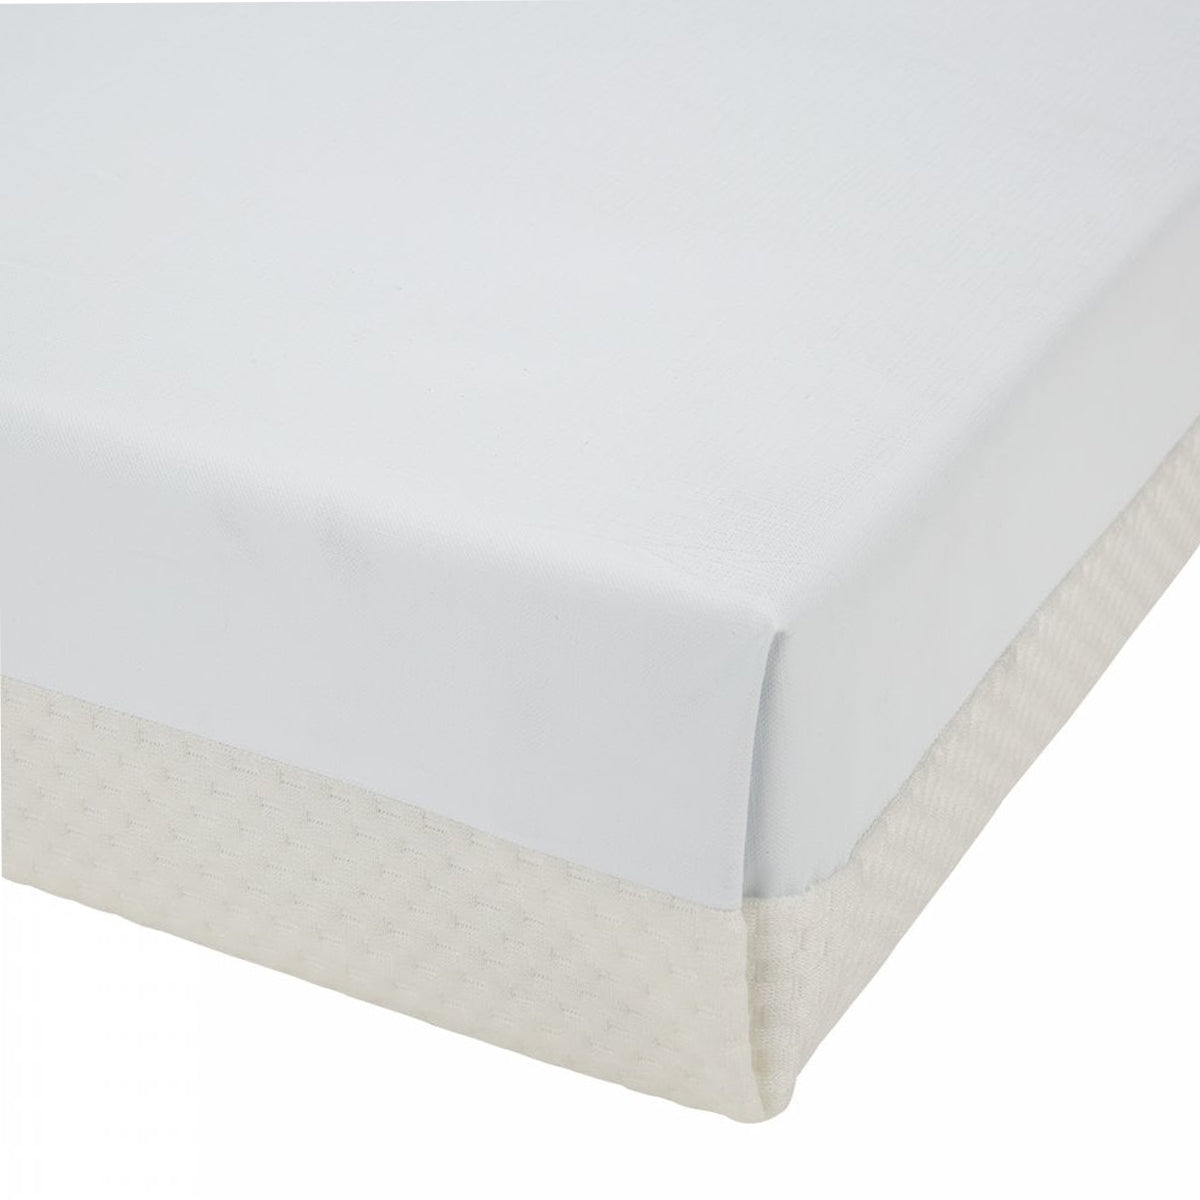 Cuddle Co Hypo Allergenic Harmony Bamboo Cotbed Sprung Mattress 140 x 70 Cms